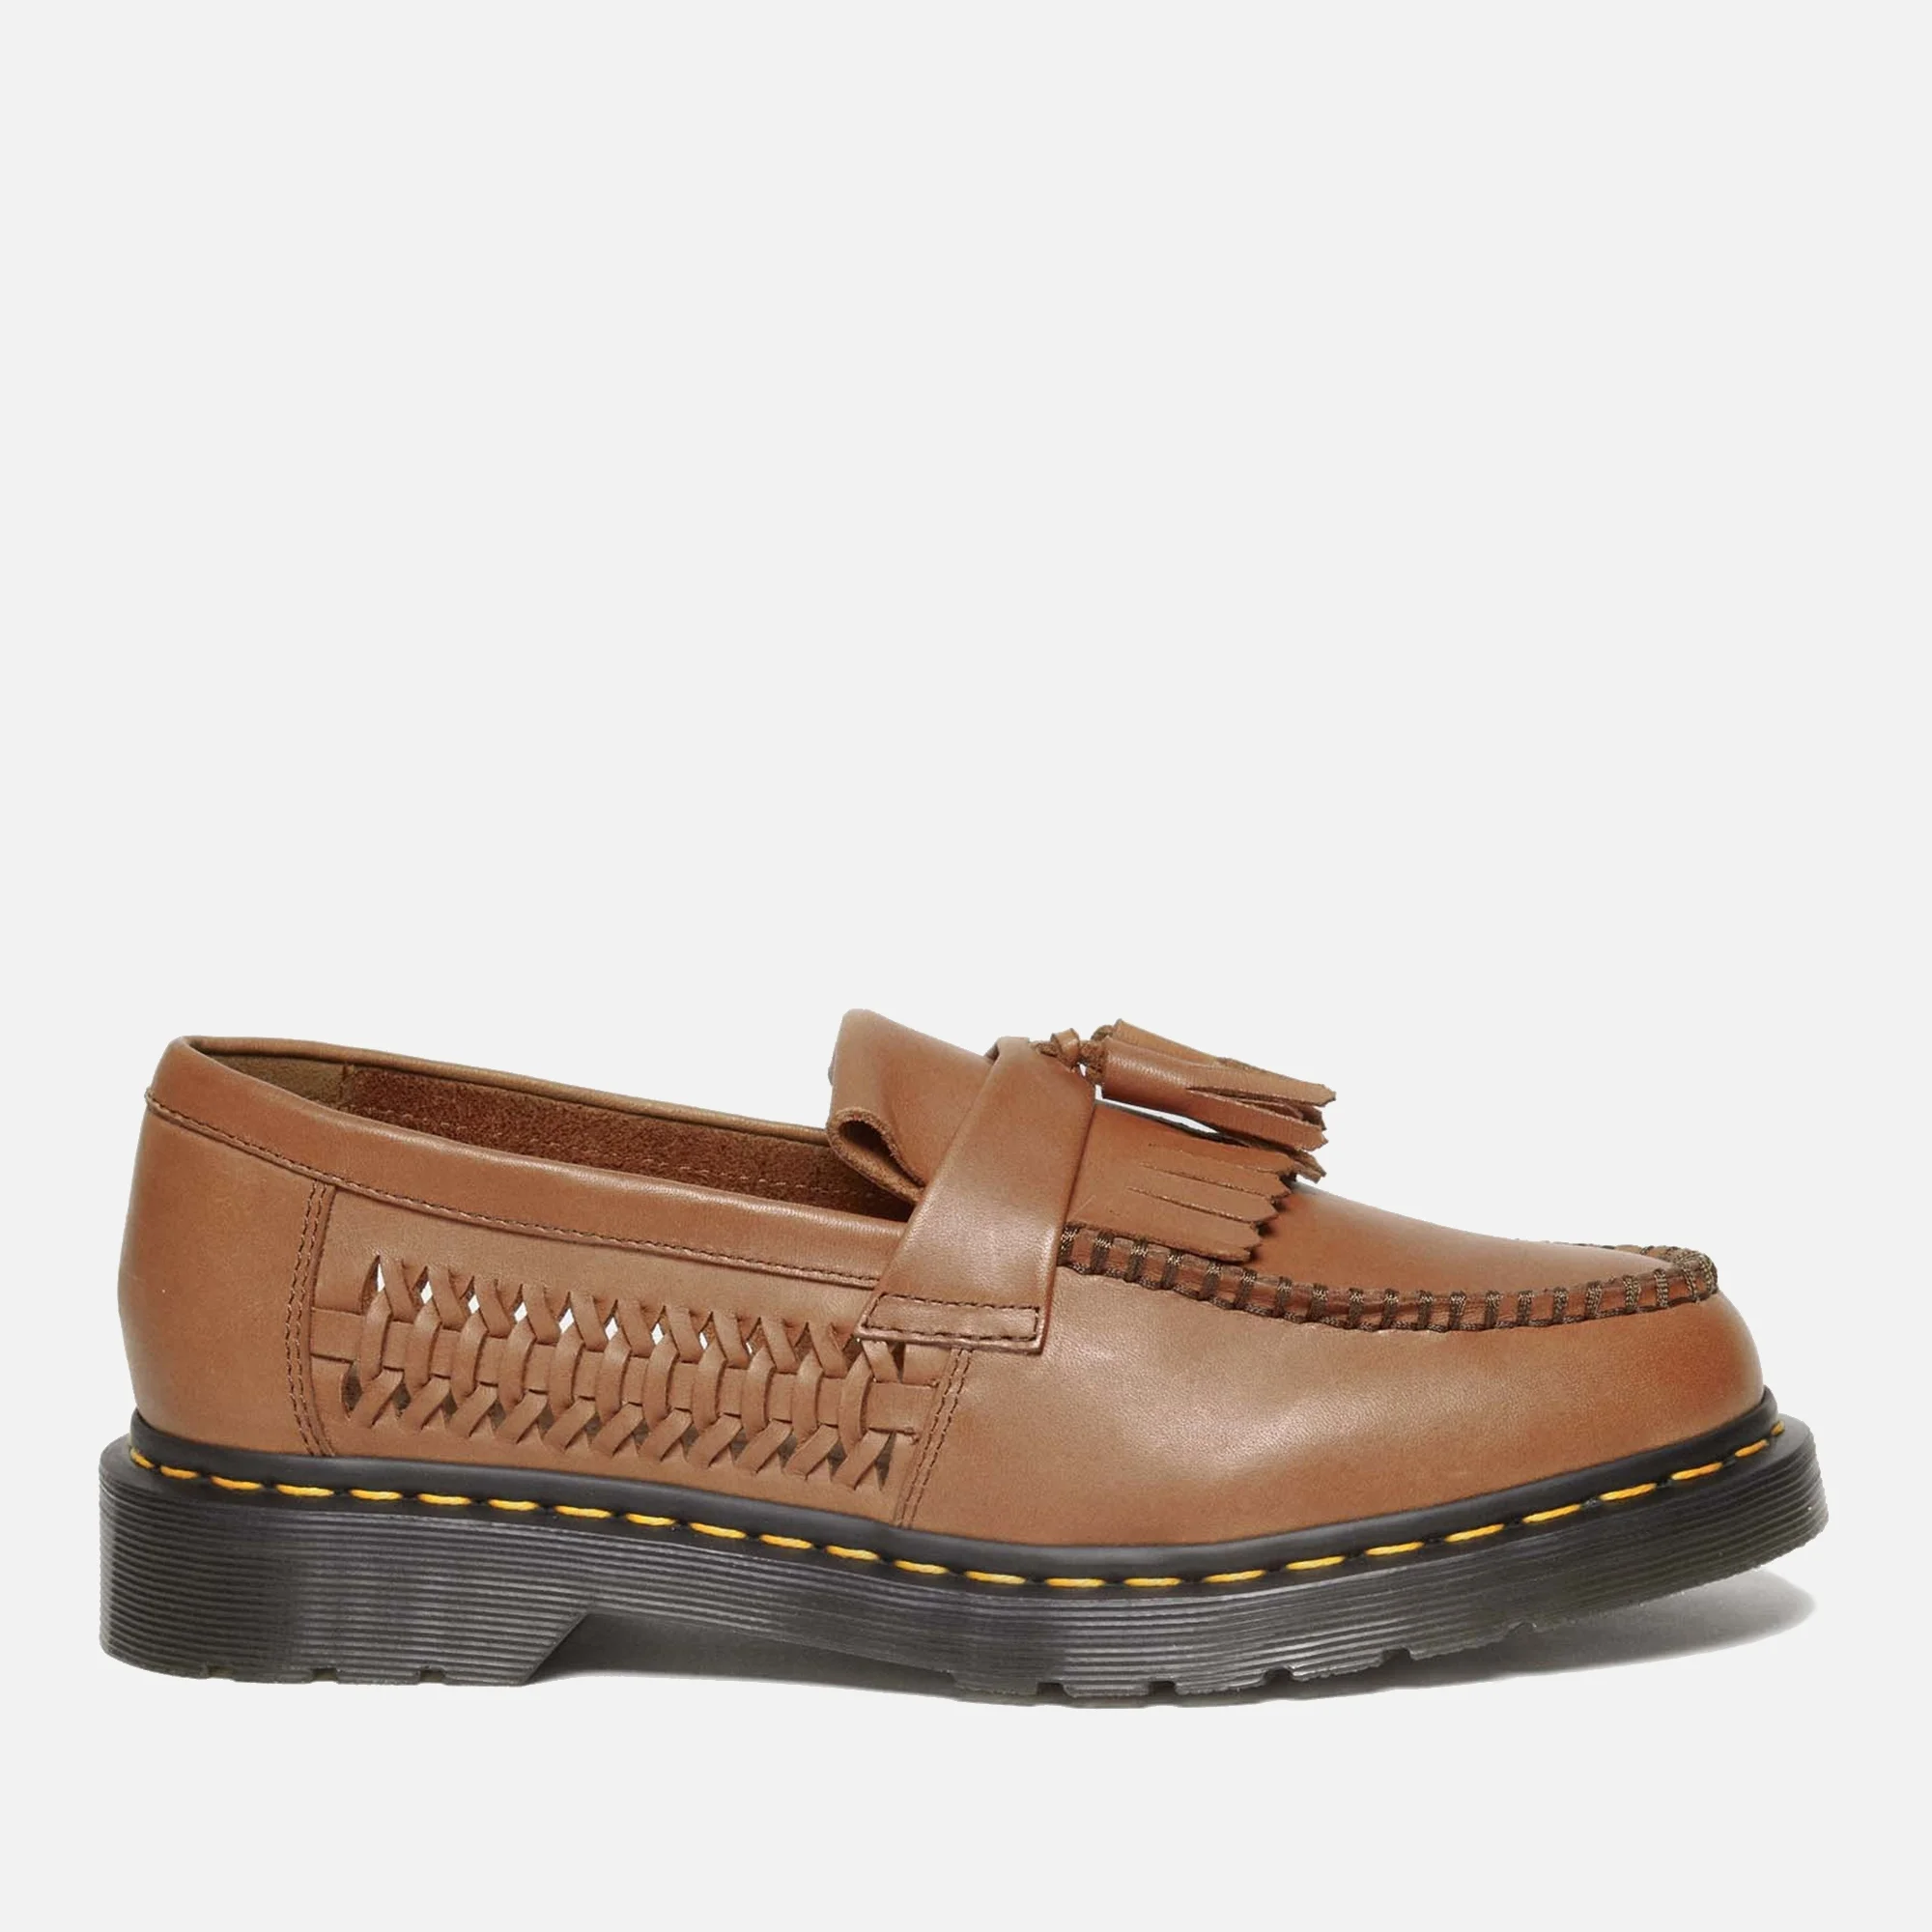 Dr. Martens Men's Adrian Woven Leather Loafers Image 1